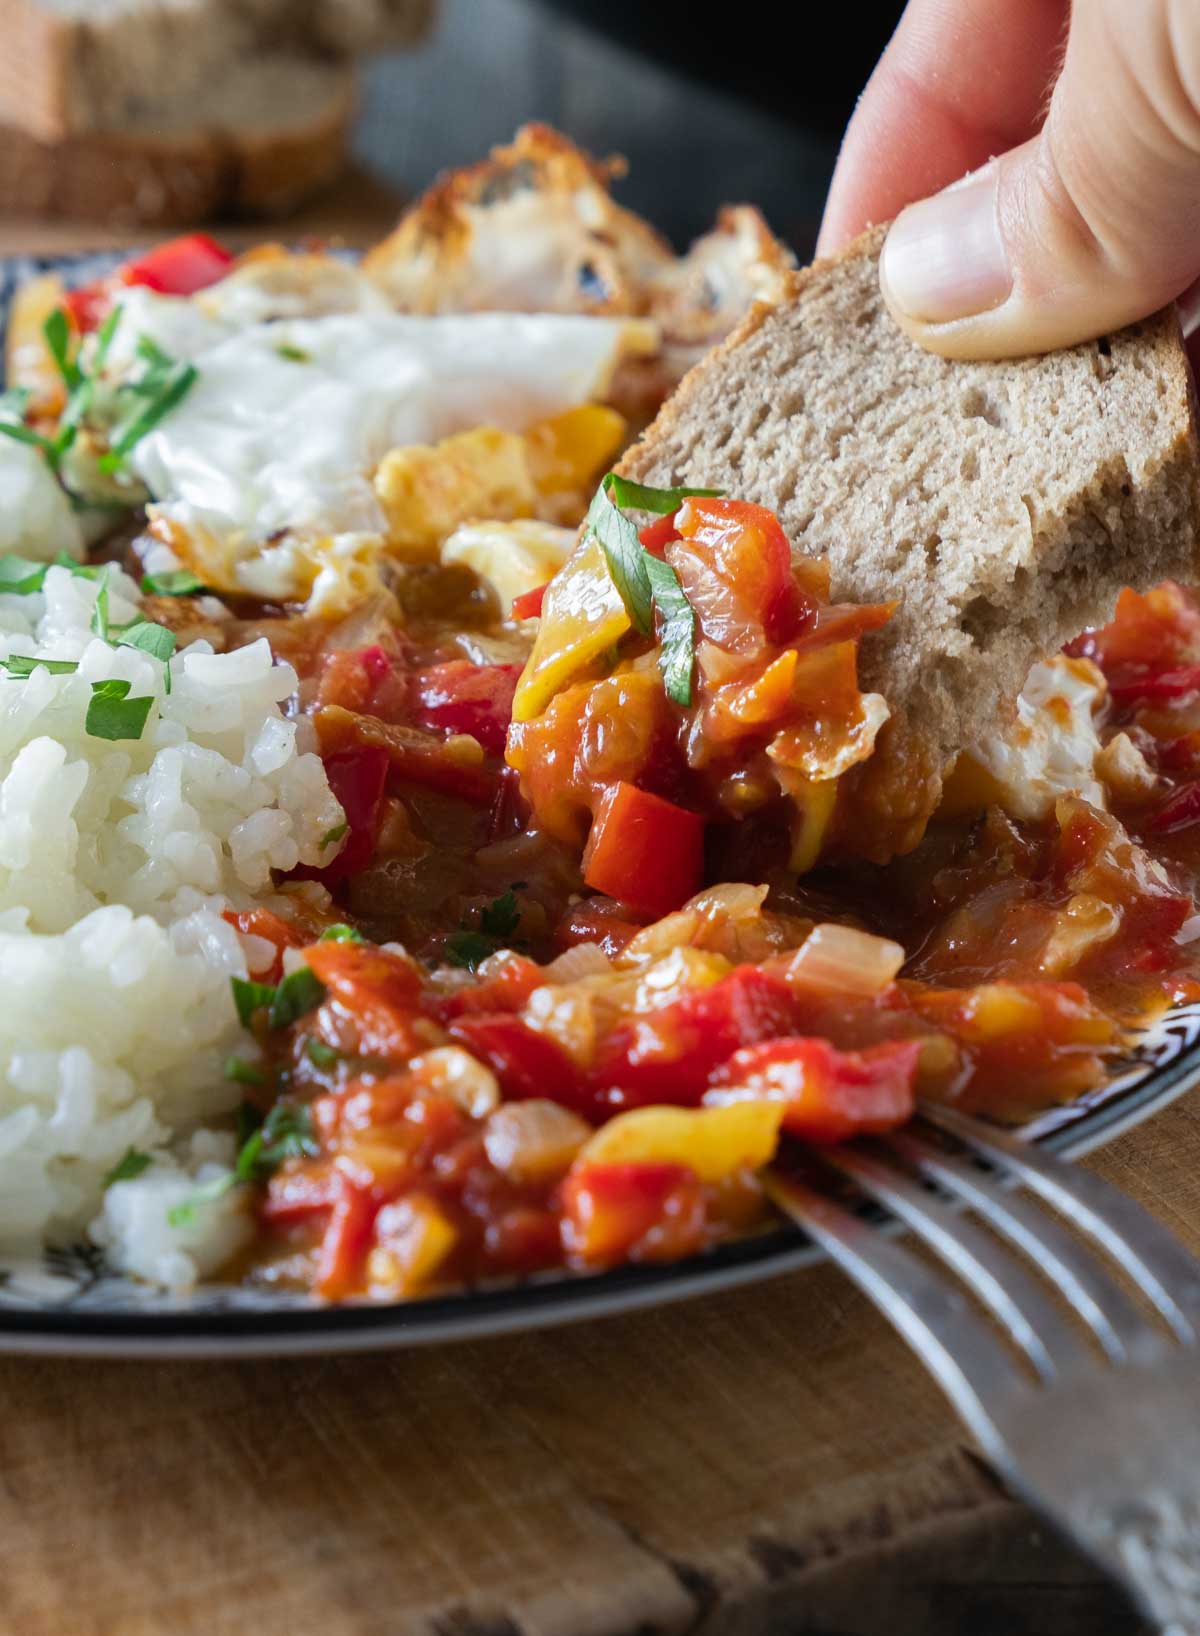 A blue and white plate heaped with sataraš, a medley of stewed or braised tomatoes, onions, and peppers in olive oil. It is served next to rice and with a fried egg on top. A piece of brown sourdough bread is being dipped into the sataras.